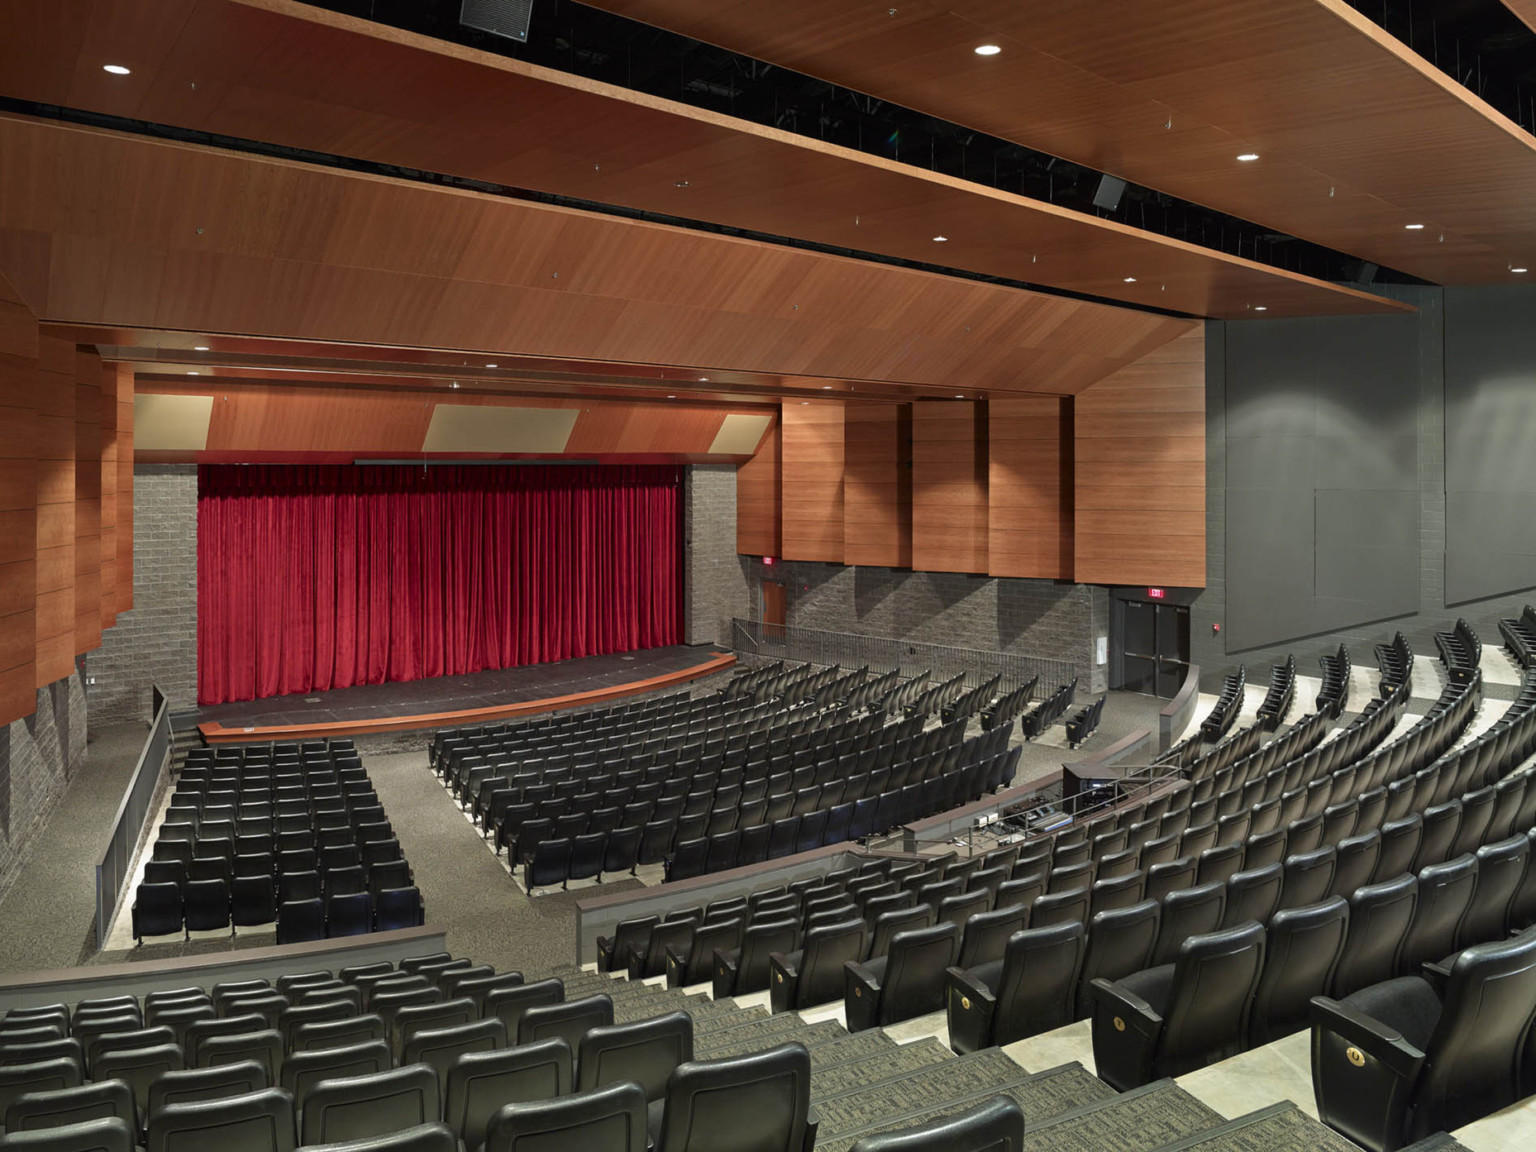 Auditorium with curved seating facing red curtained stage. Wood panels hang above audience and frame stage above stone wall